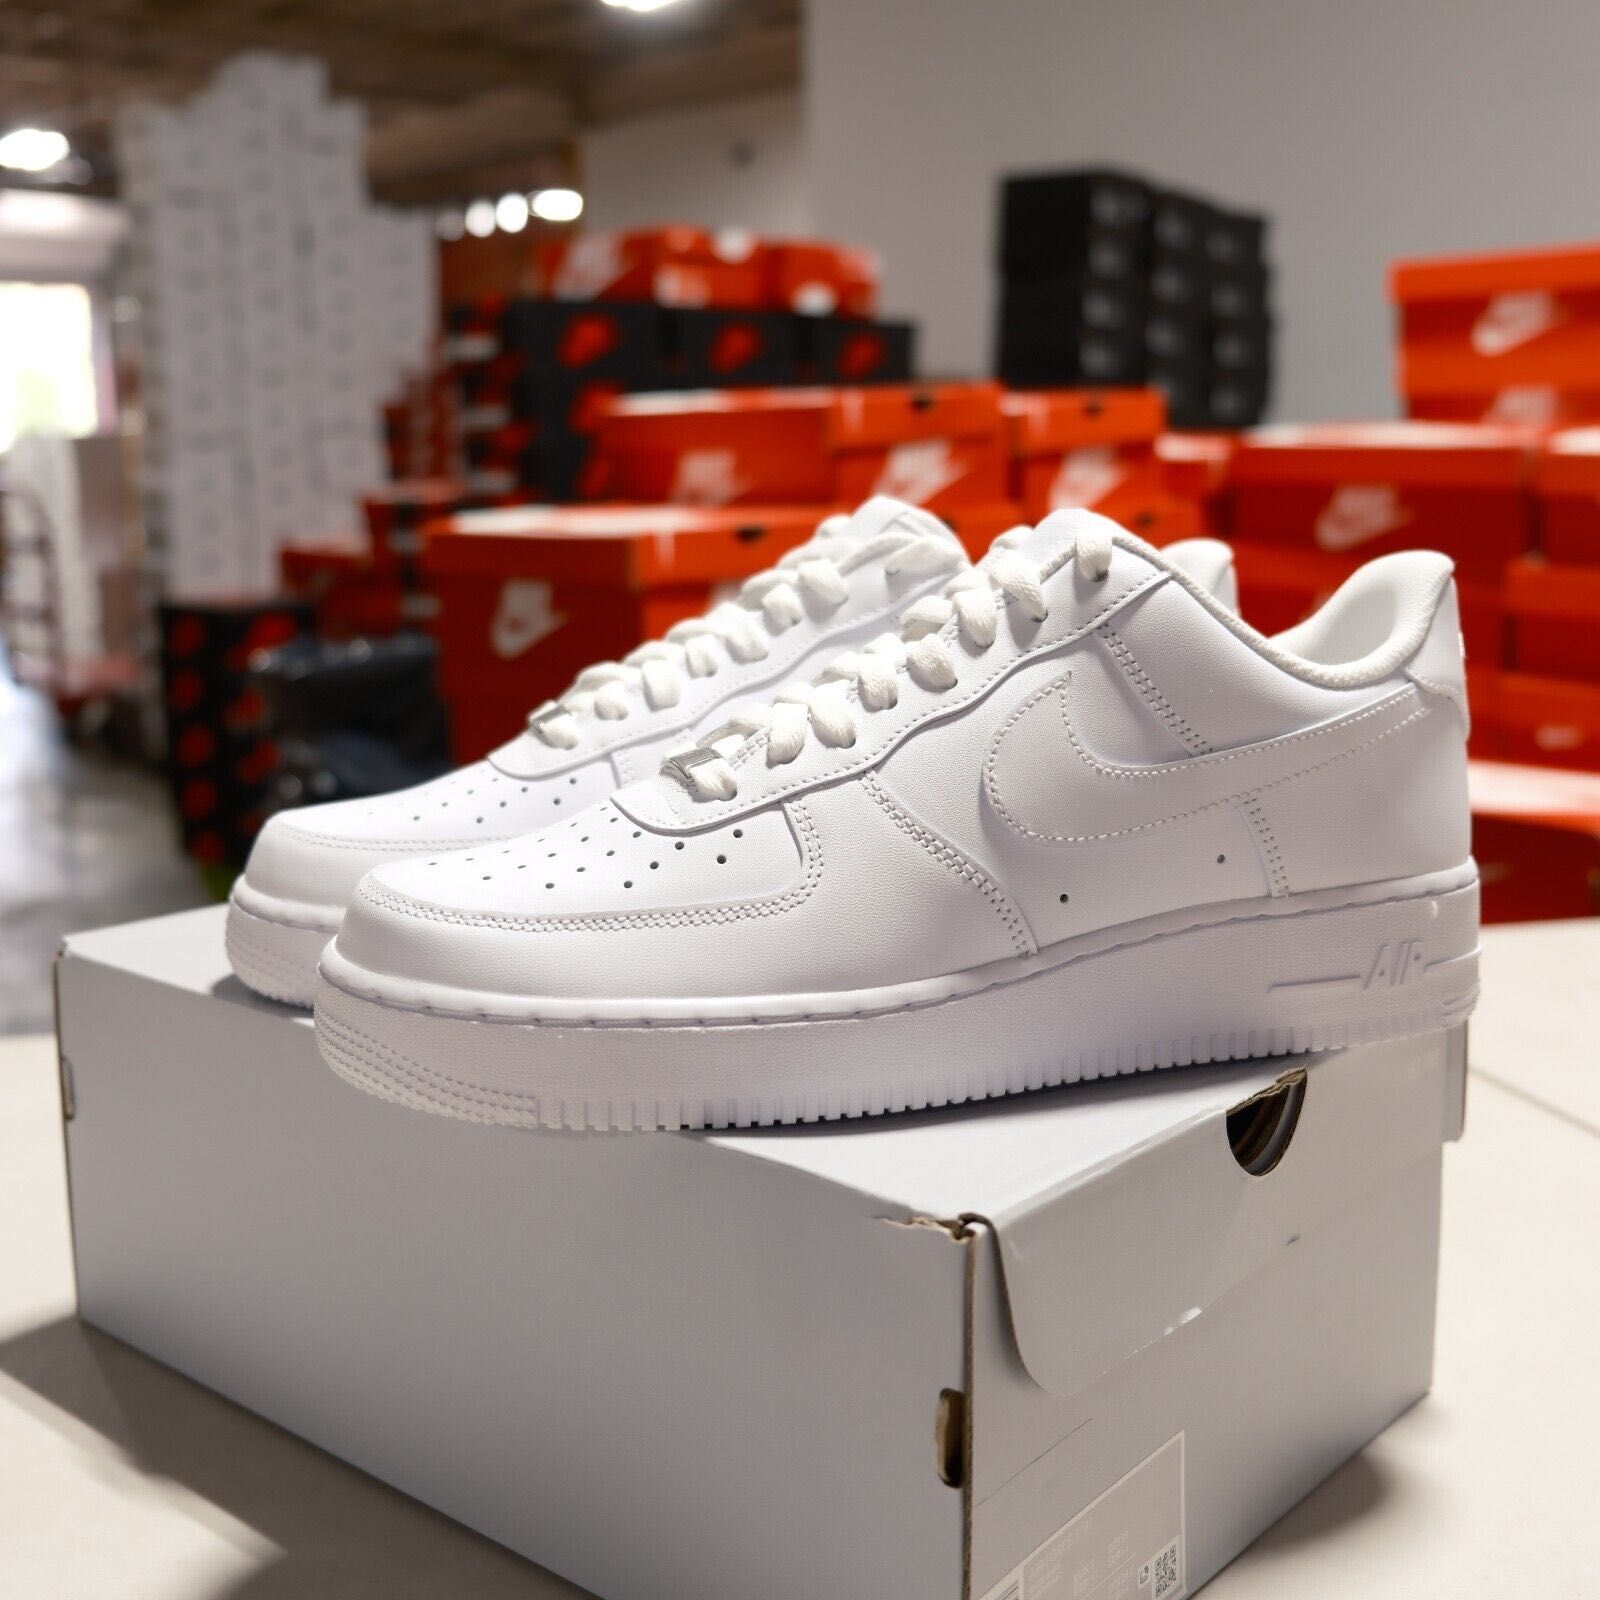 Nike Air Force 1 '07 Low Triple White Adidasi Unisex - REDUCERE